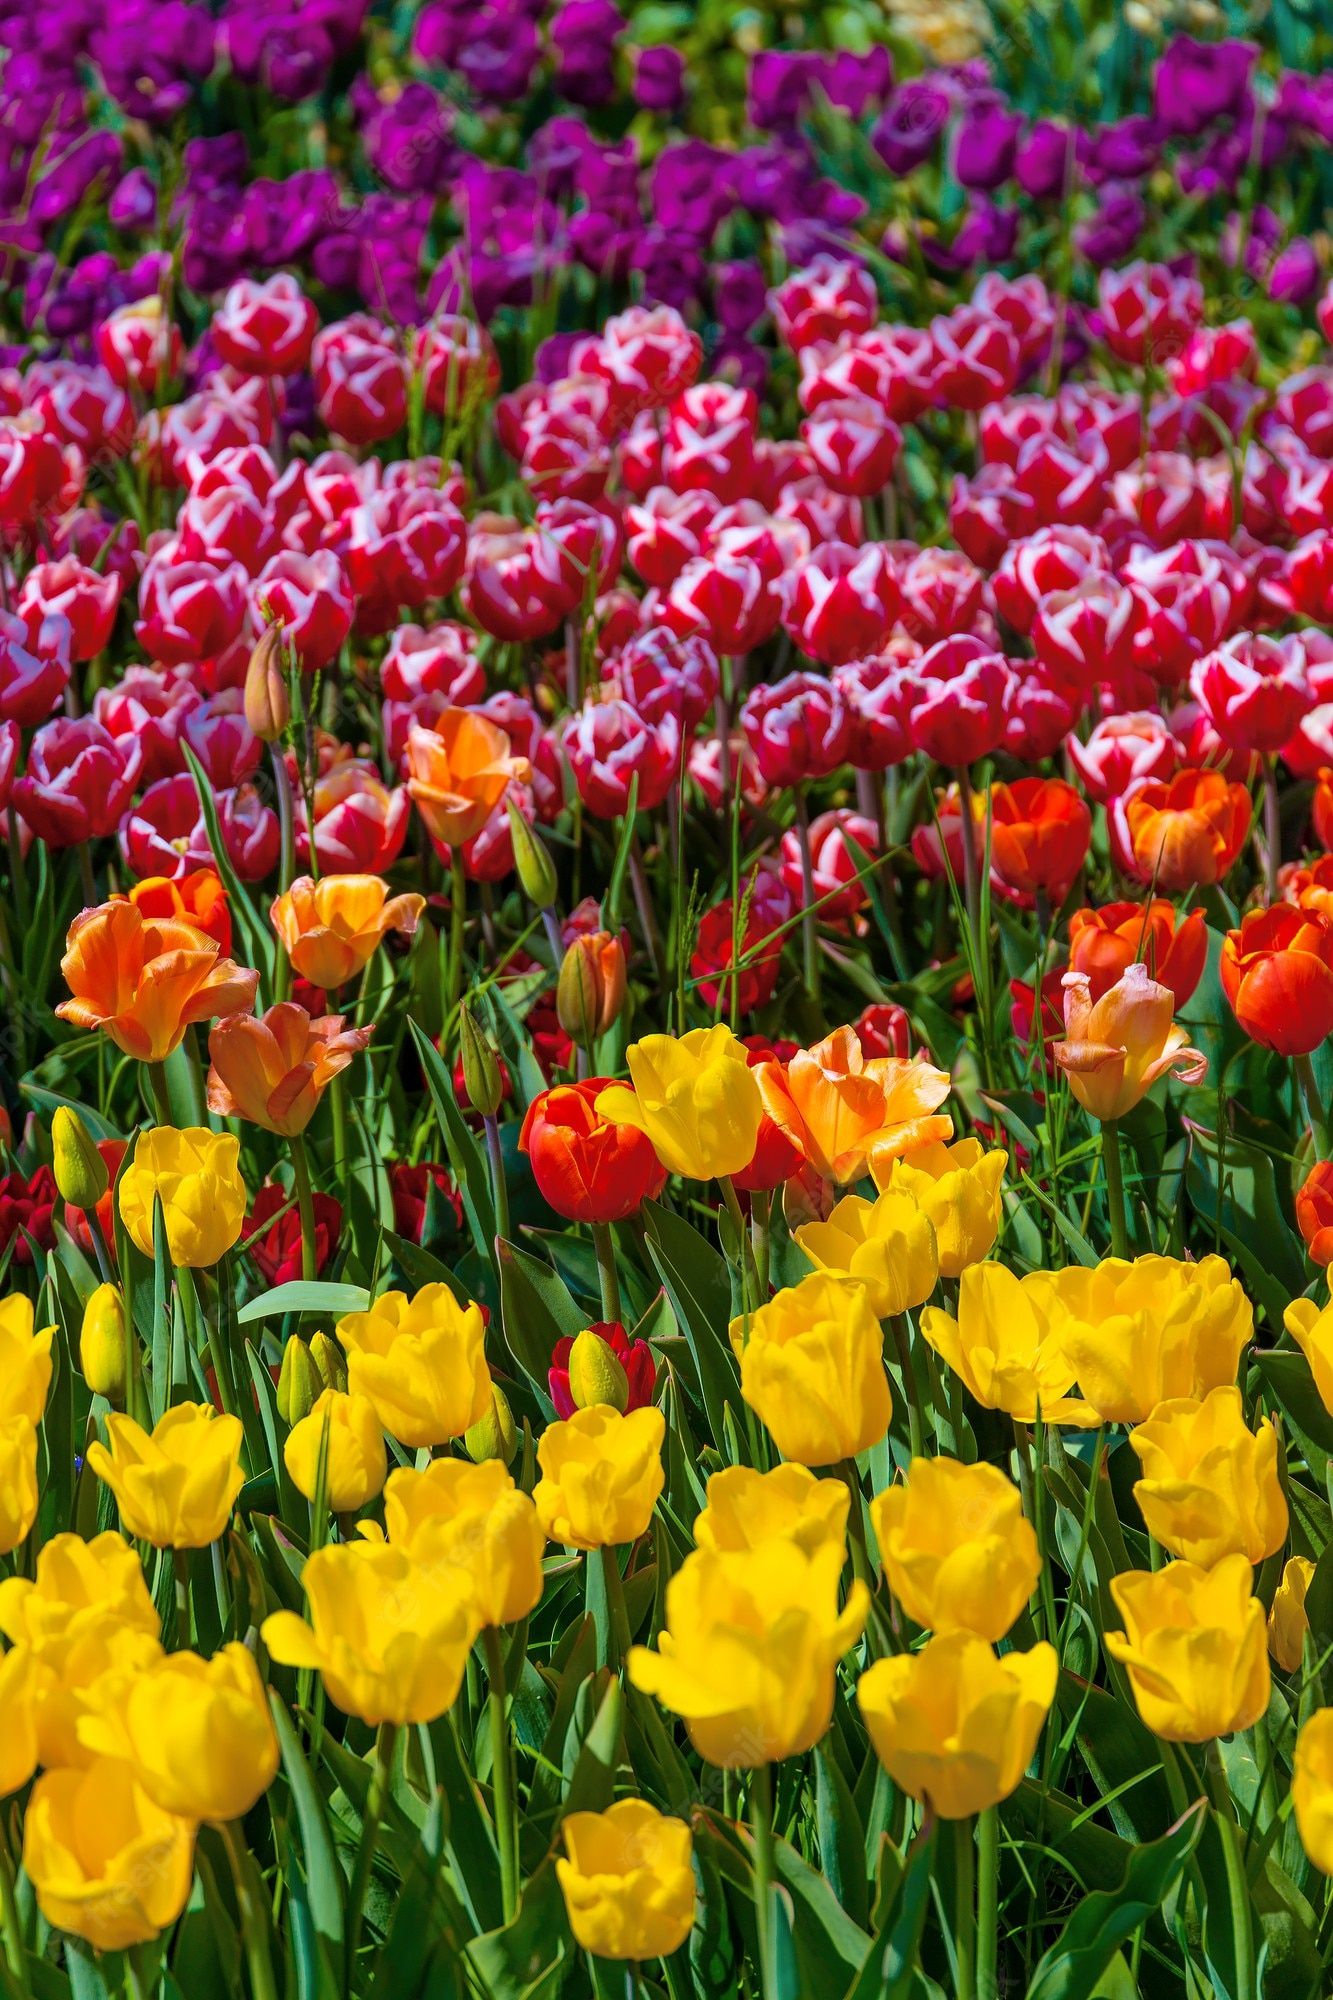 A large field of colorful tulips in bloom - Tulip